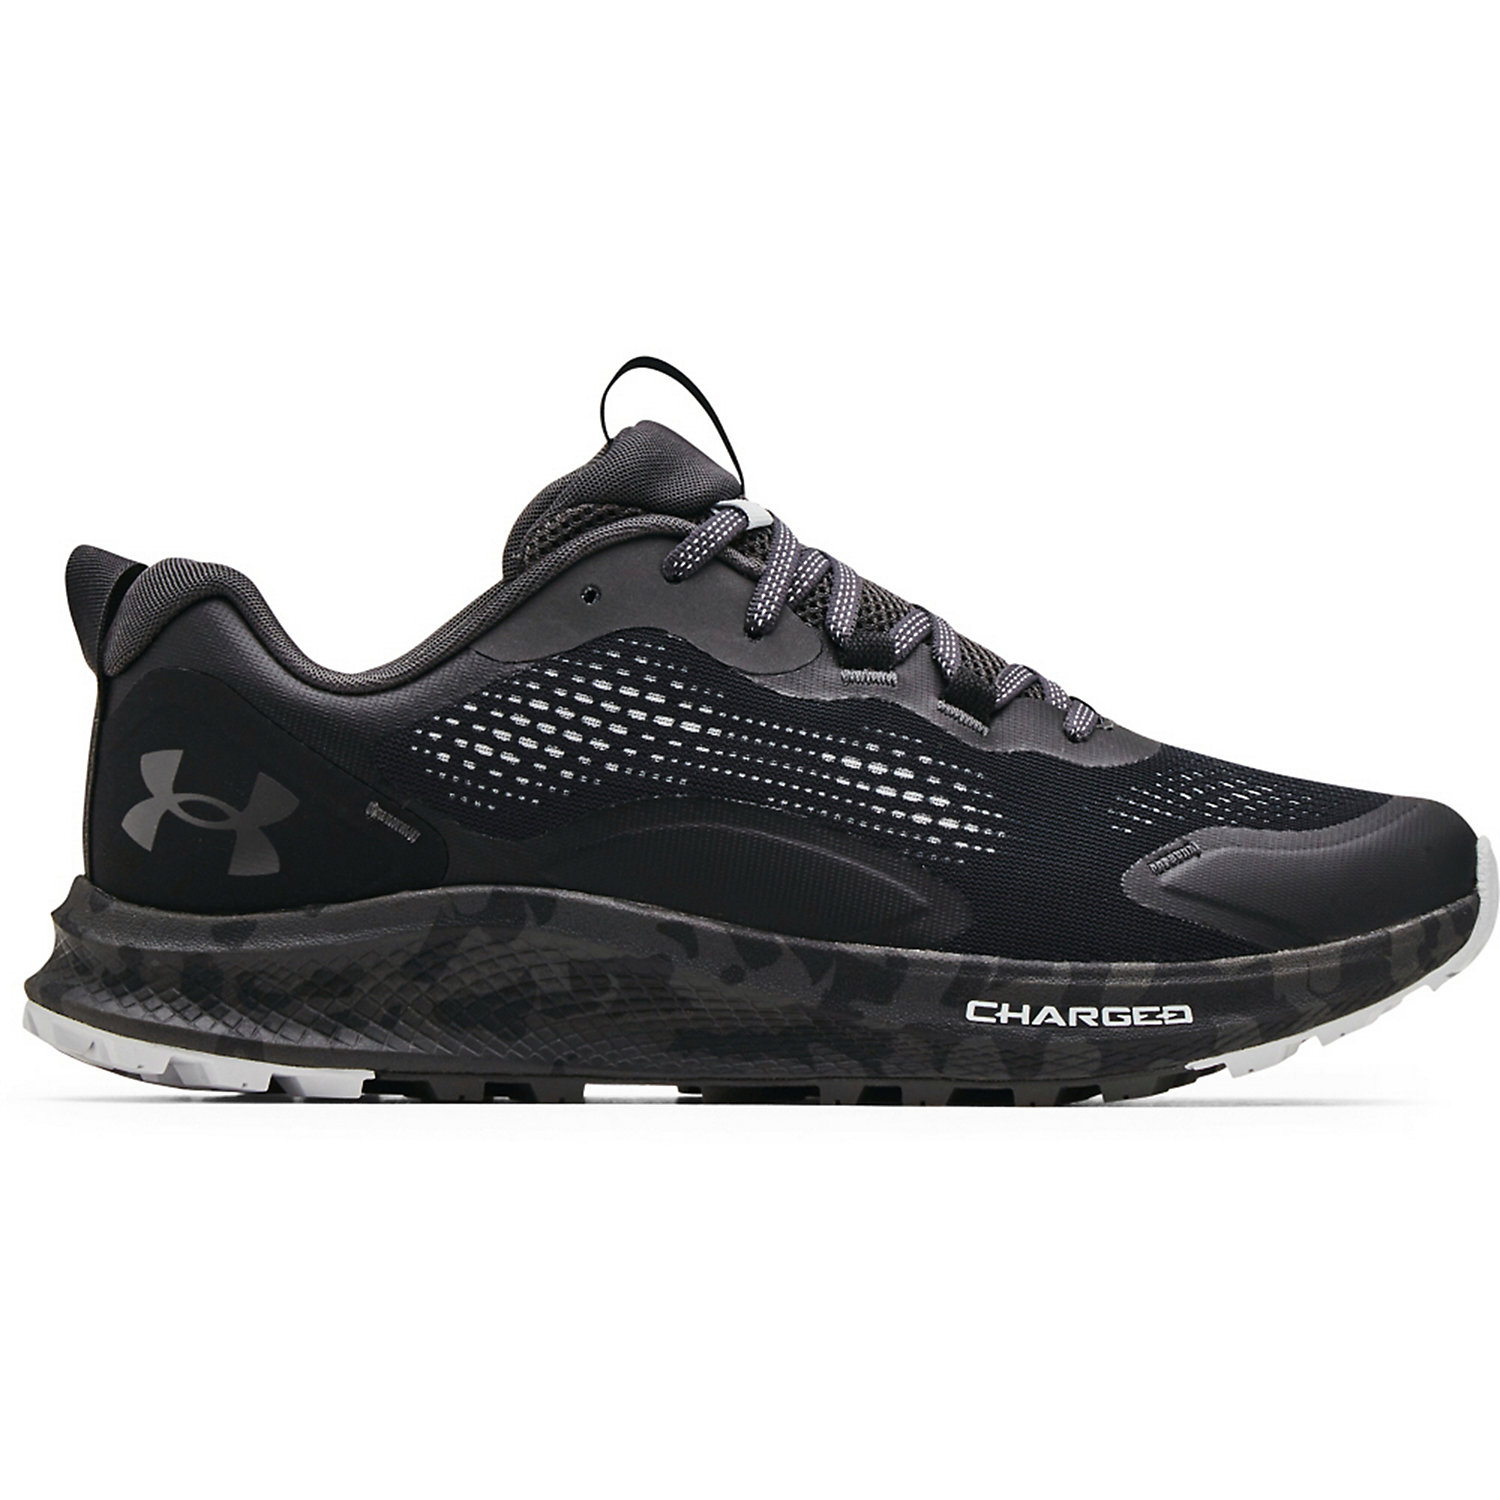 Under Armour Mens Charged Bandit TR 2 Shoe